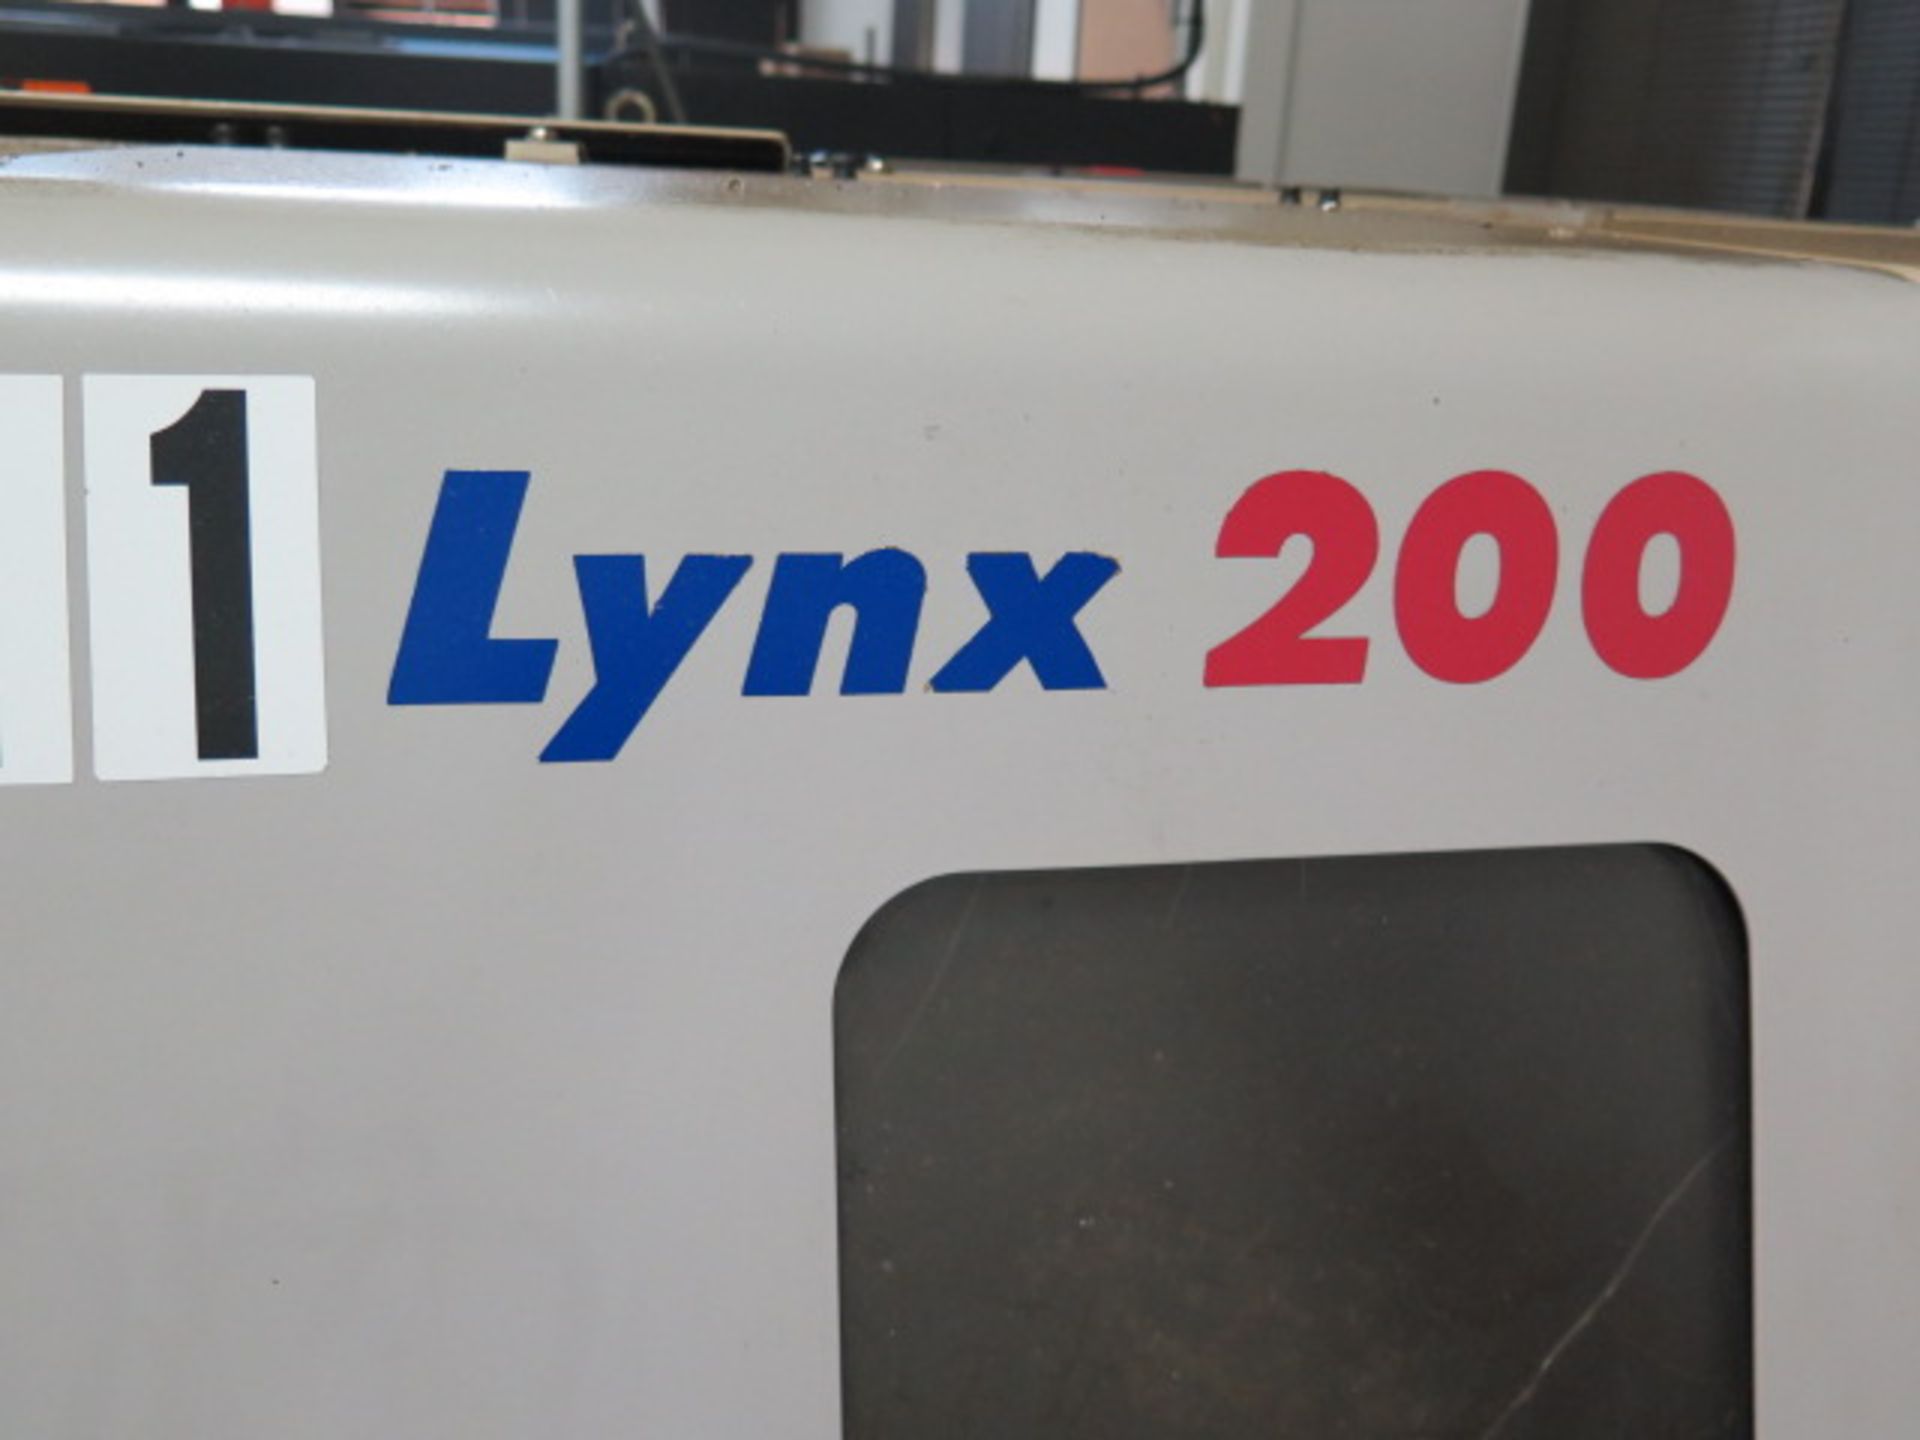 2000 Daewoo LYNX 200B CNC Turning Center s/n L2001751 w/ Fanuc Series 21i-T Controls, SOLD AS IS - Image 13 of 14